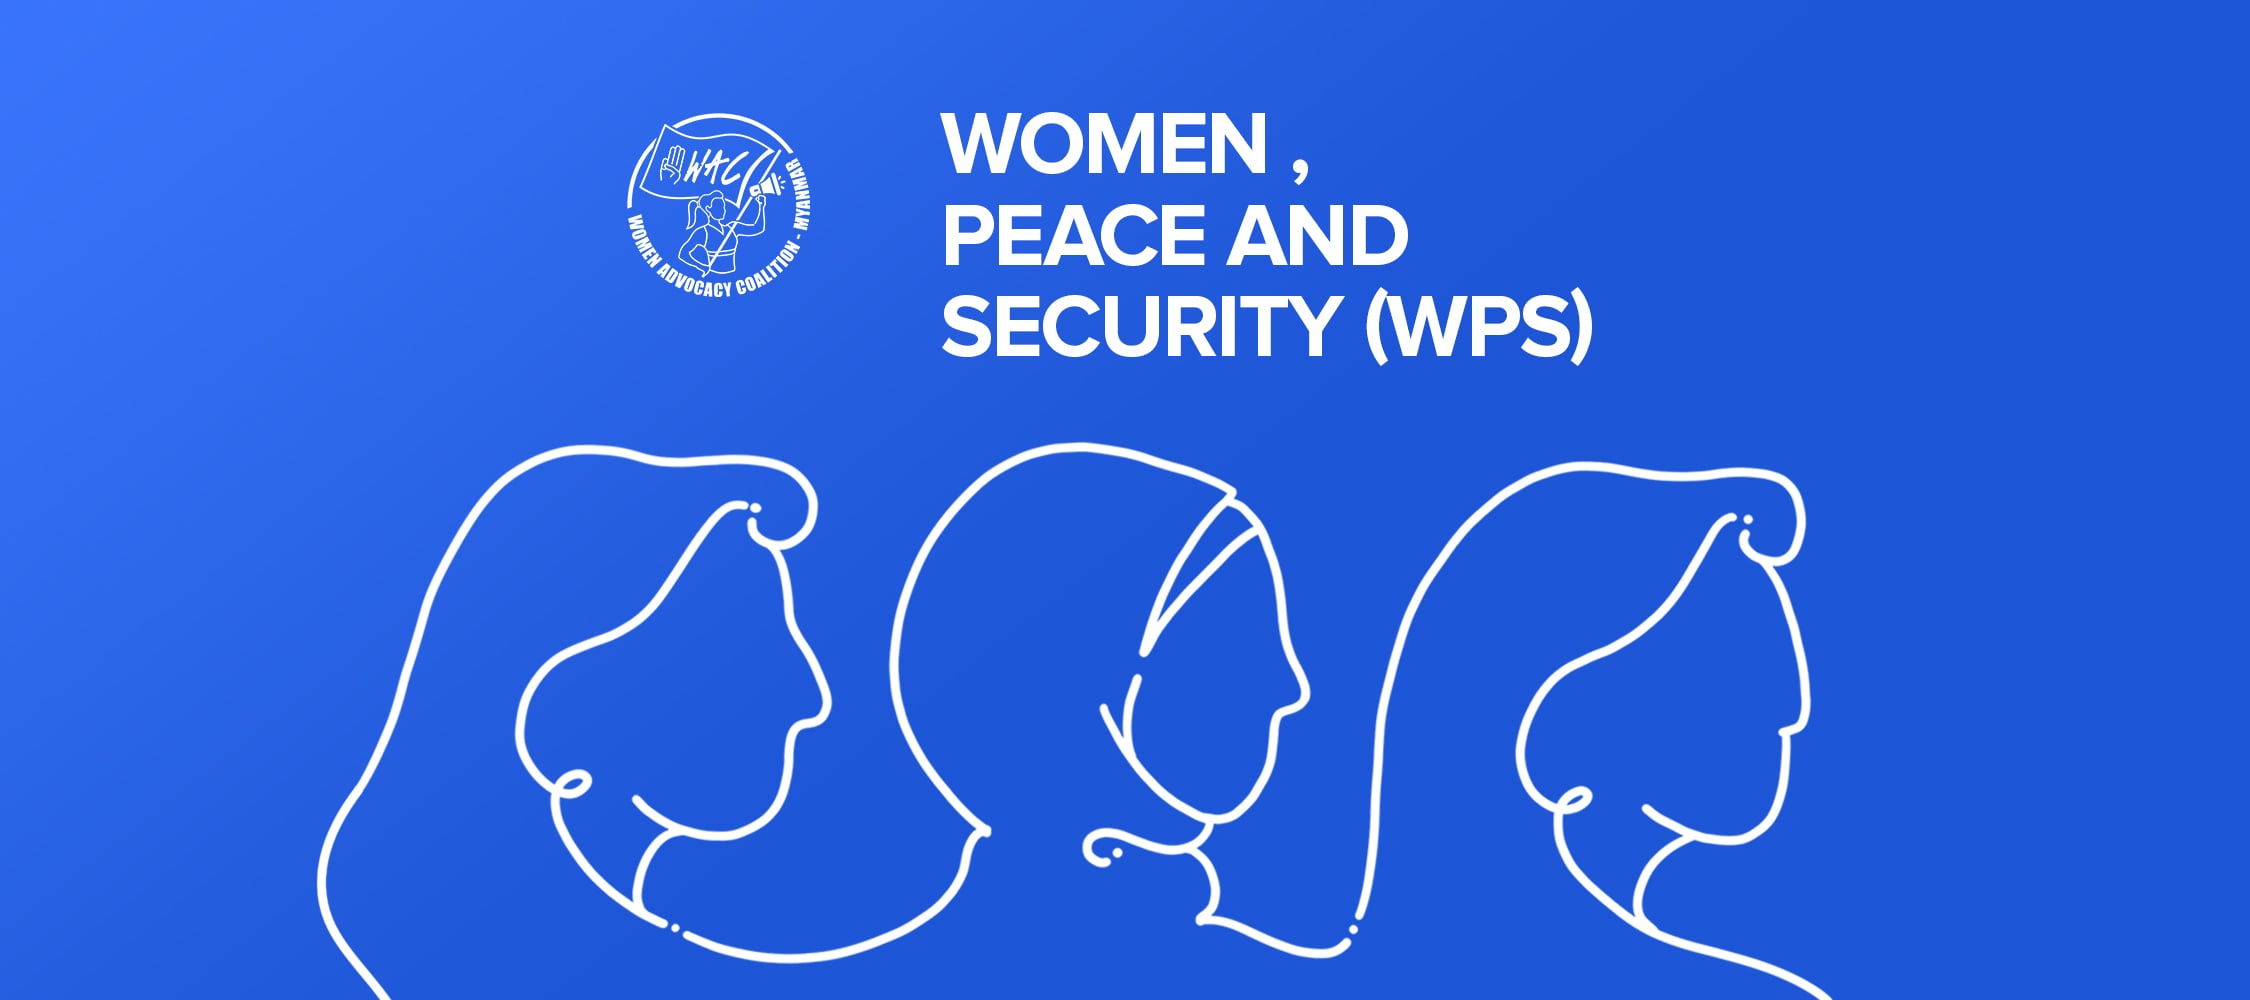 Women, Peace and Security (WPS) WACM001